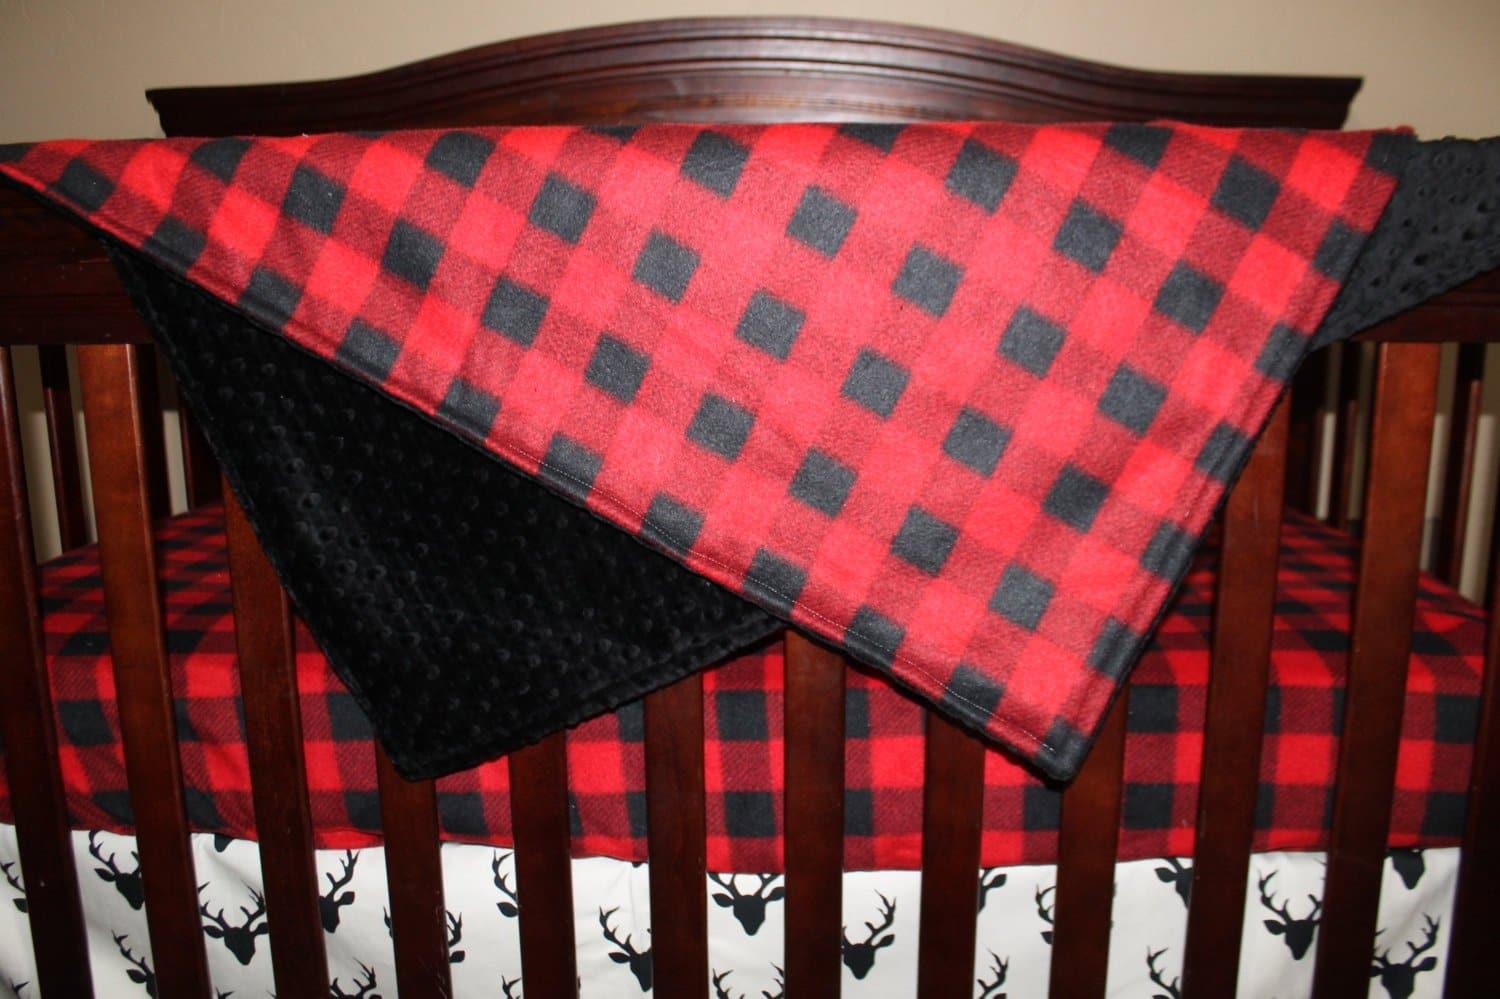 Standard Blanket-Mountain Lodge Red Black Buffalo Check and Black Minky Woodland Blanket - DBC Baby Bedding Co 